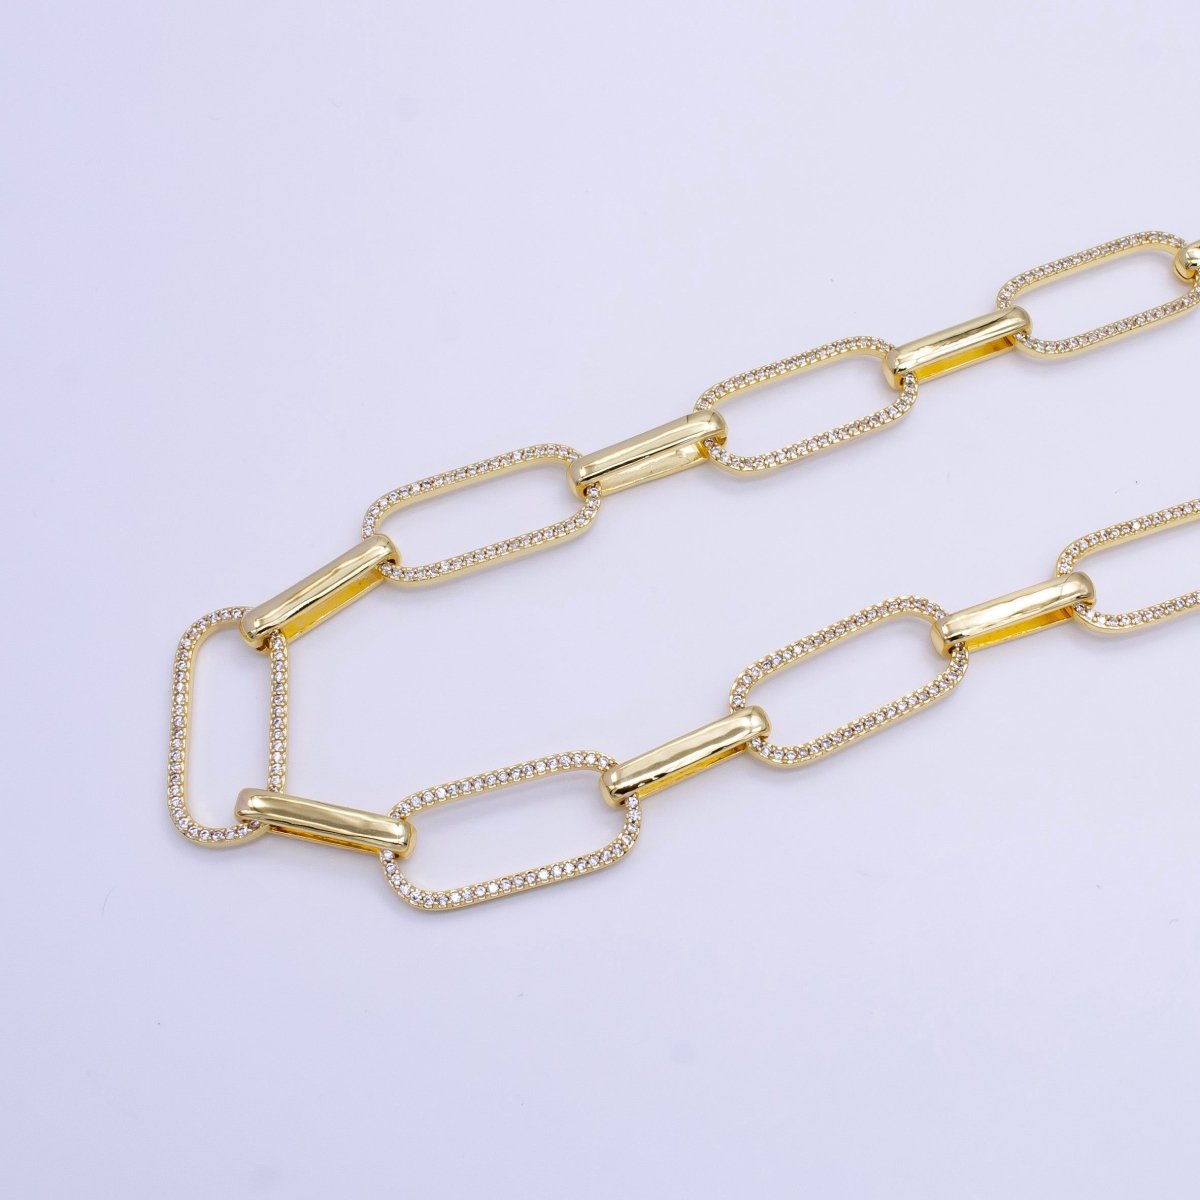 Bold Gold Micro Pave Paperclip Chain by Meter, CZ Specialty Link Chain Necklace by Meter, For Fashion Jewelry Making, 24K Gold Filled UNIQUE PAPER CLIP For Necklace Bracelet Anklet Supply Component | WA - 1419 Clearance Pricing - DLUXCA